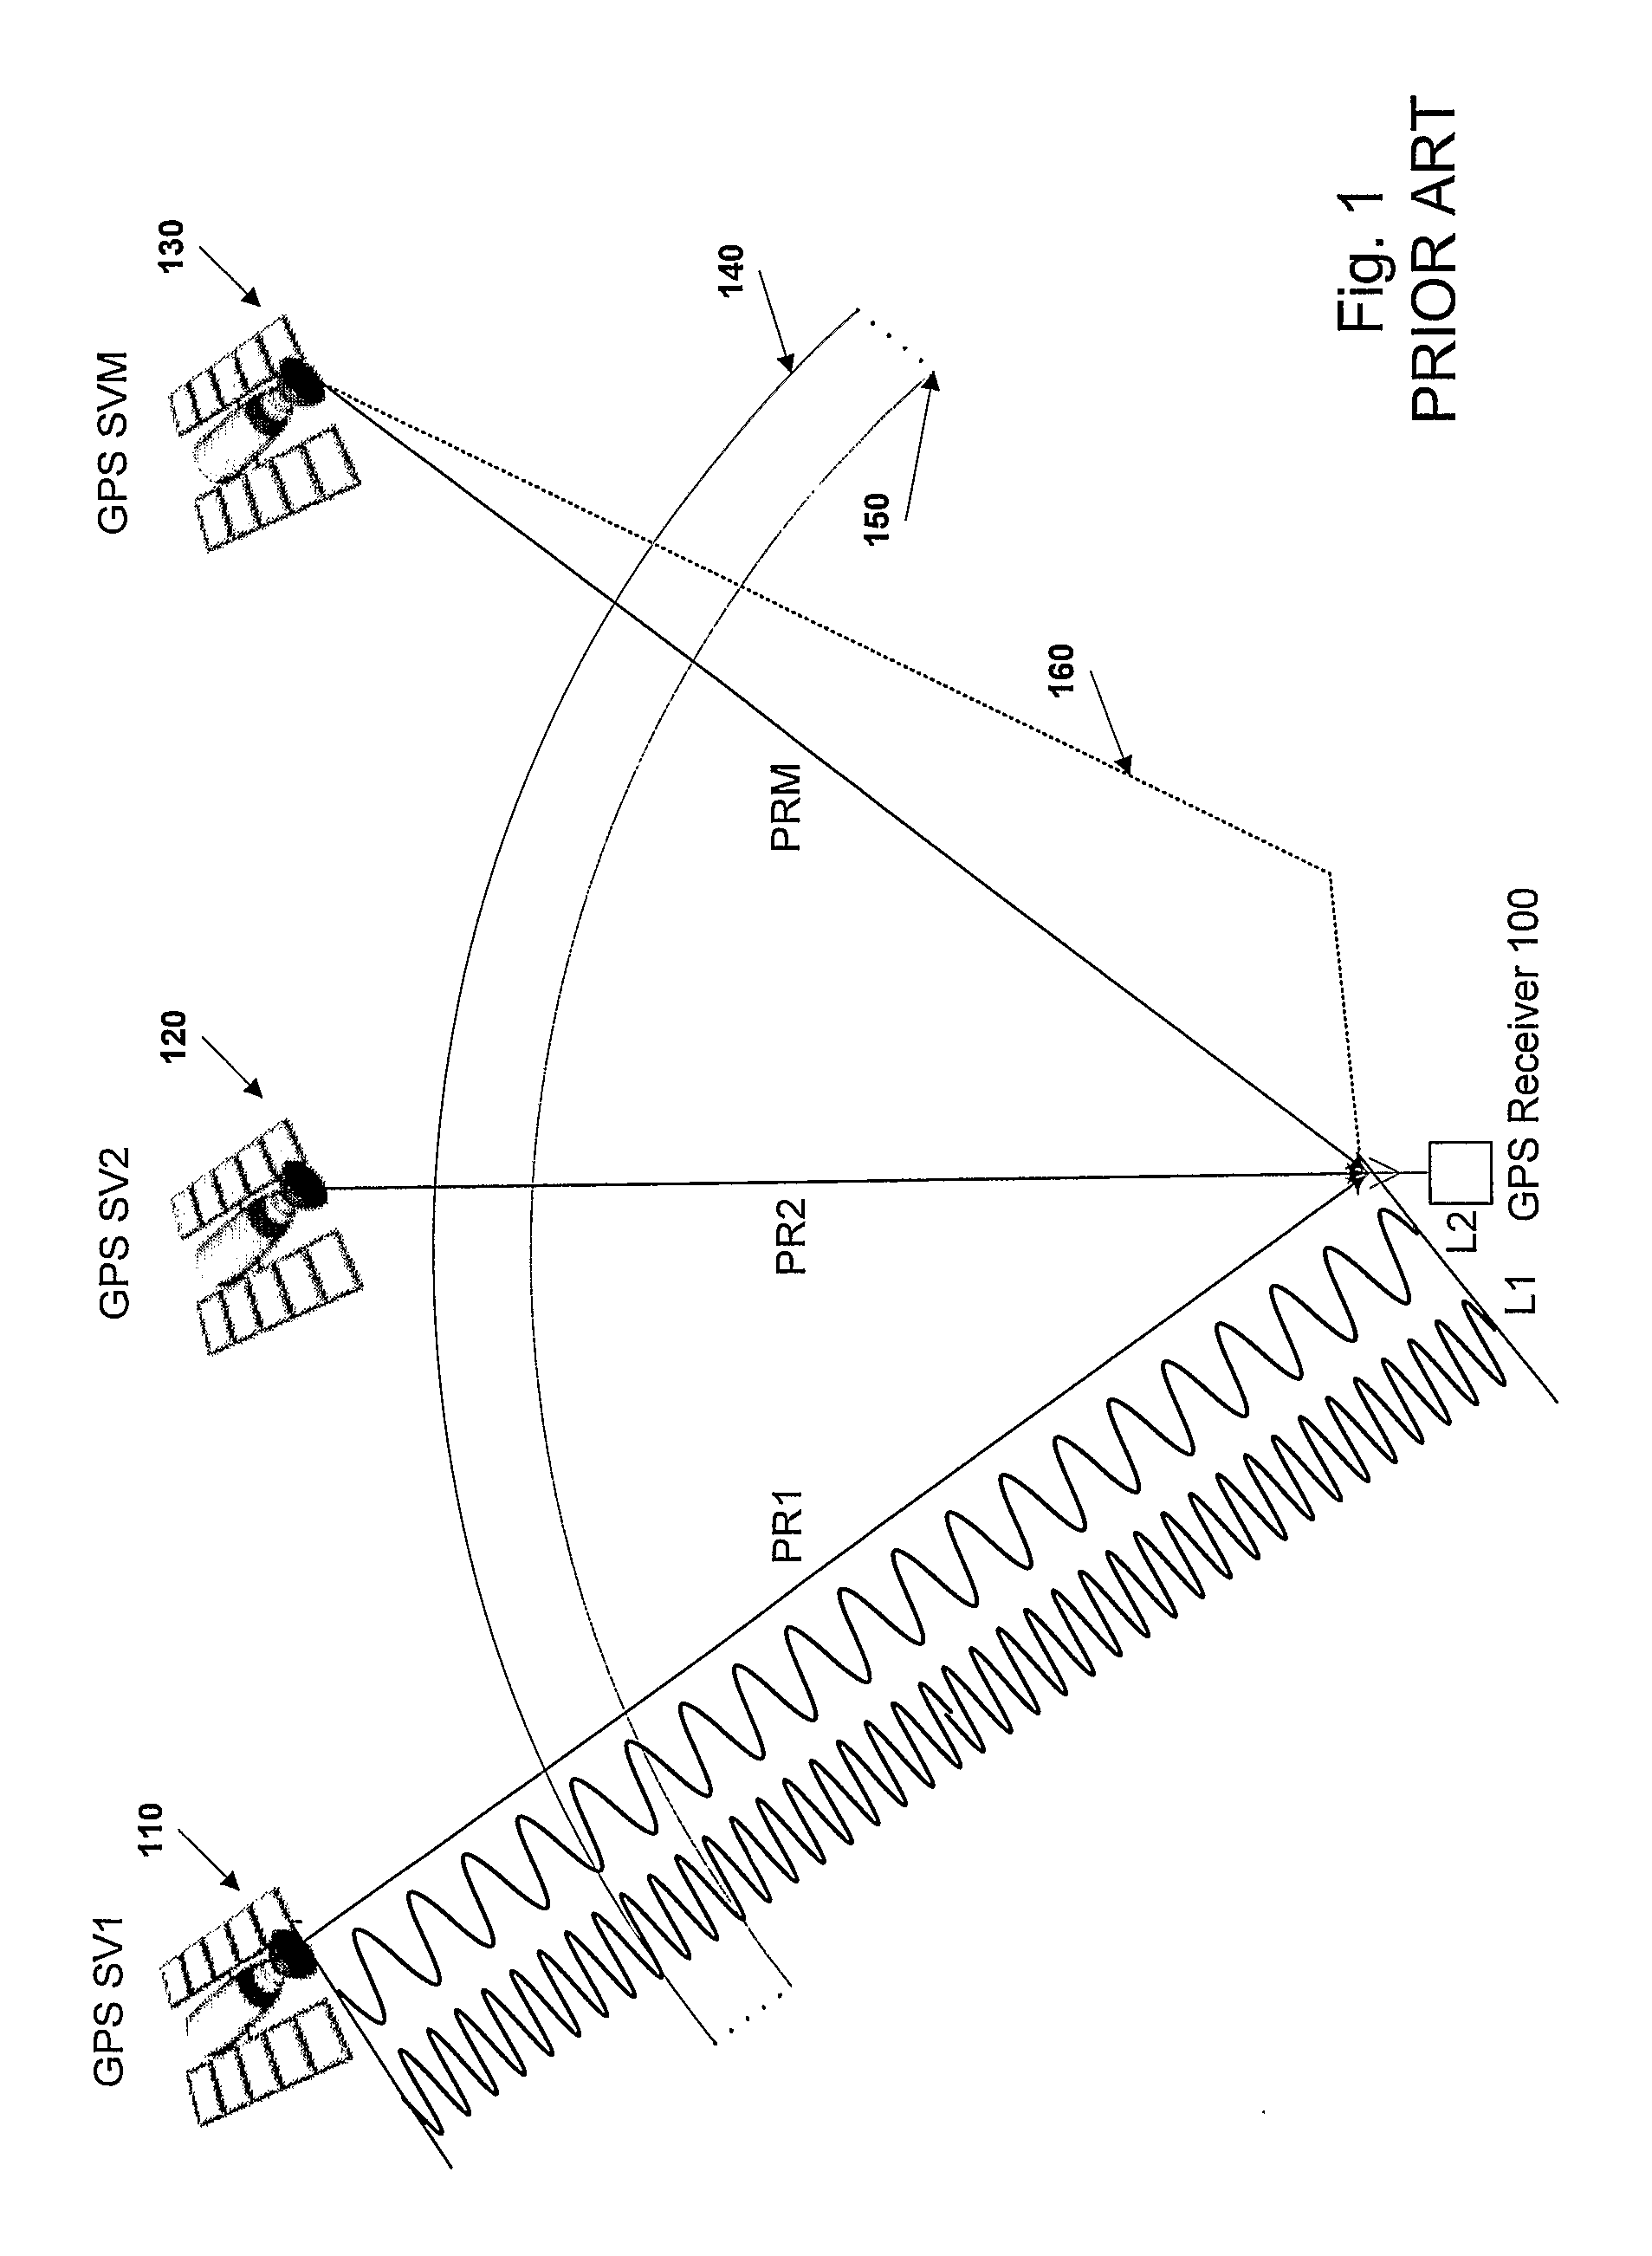 Ionosphere modeling apparatus and methods